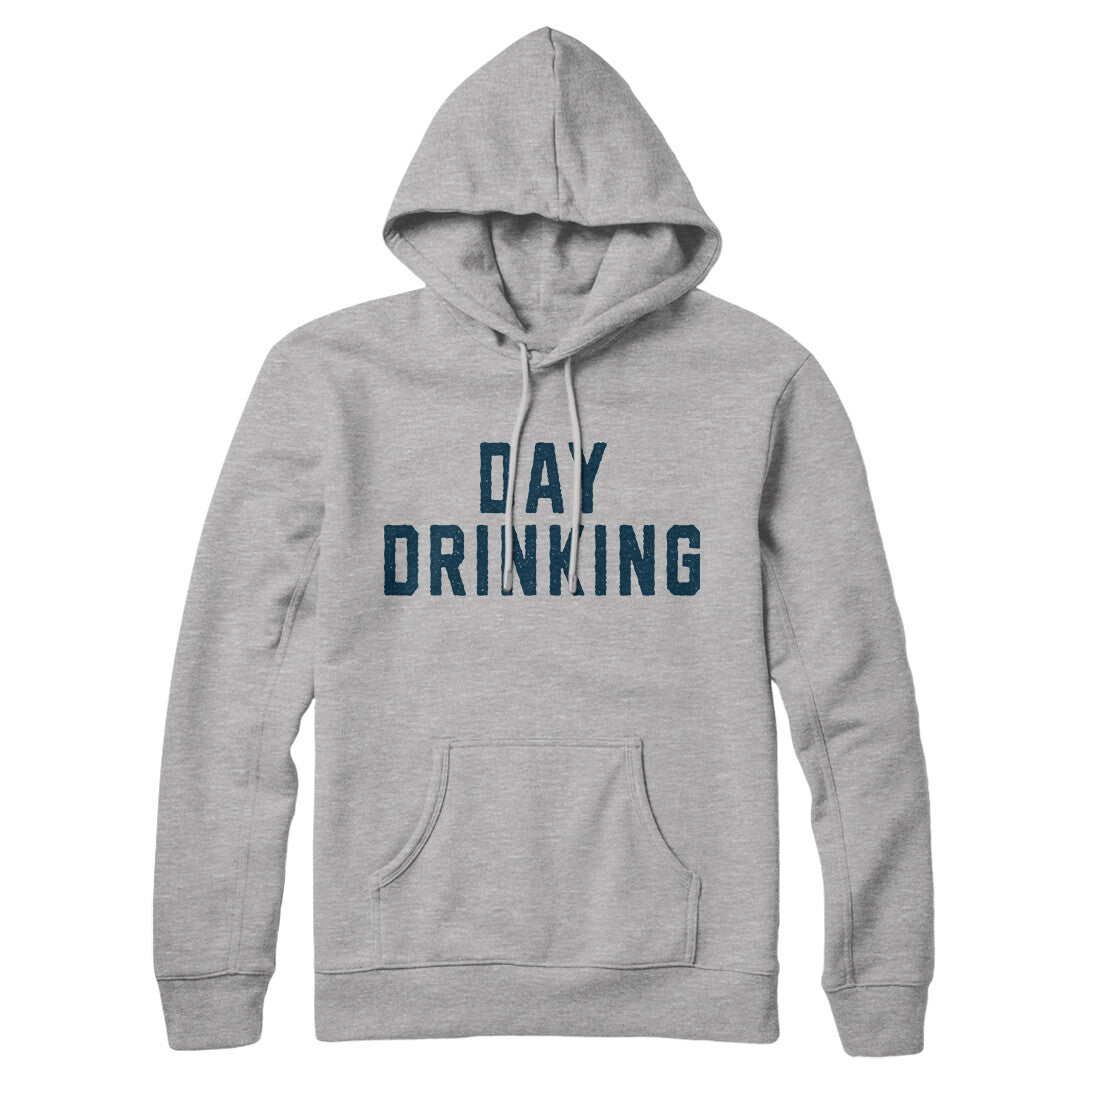 Day Drinking in Heather Grey Color